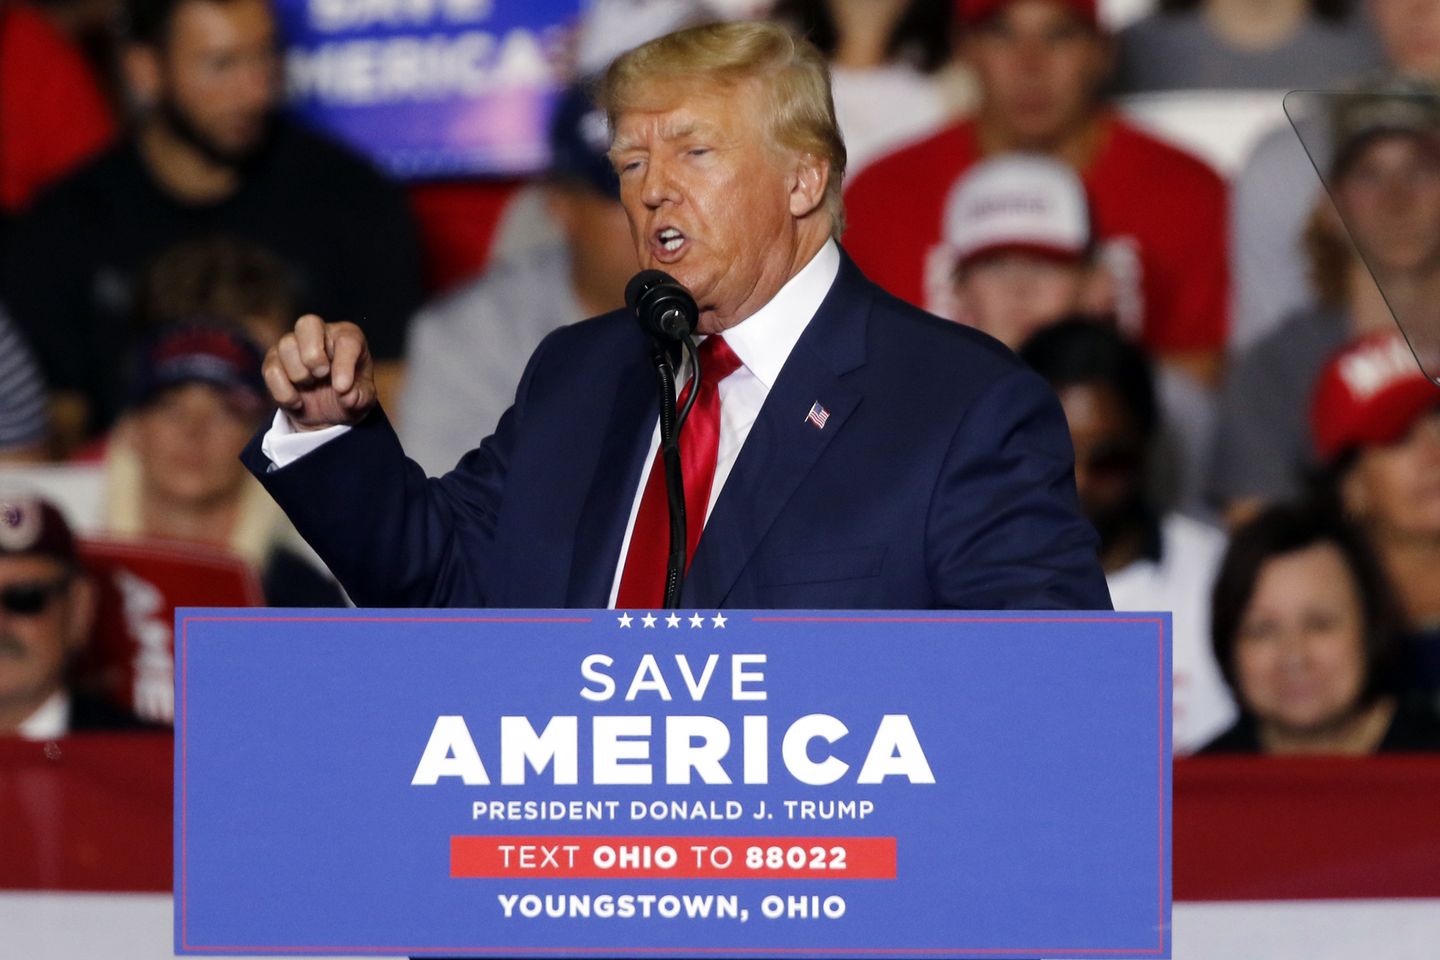 Trump world launches MAGA Inc. to support midterm candidates, possible 2024 bid